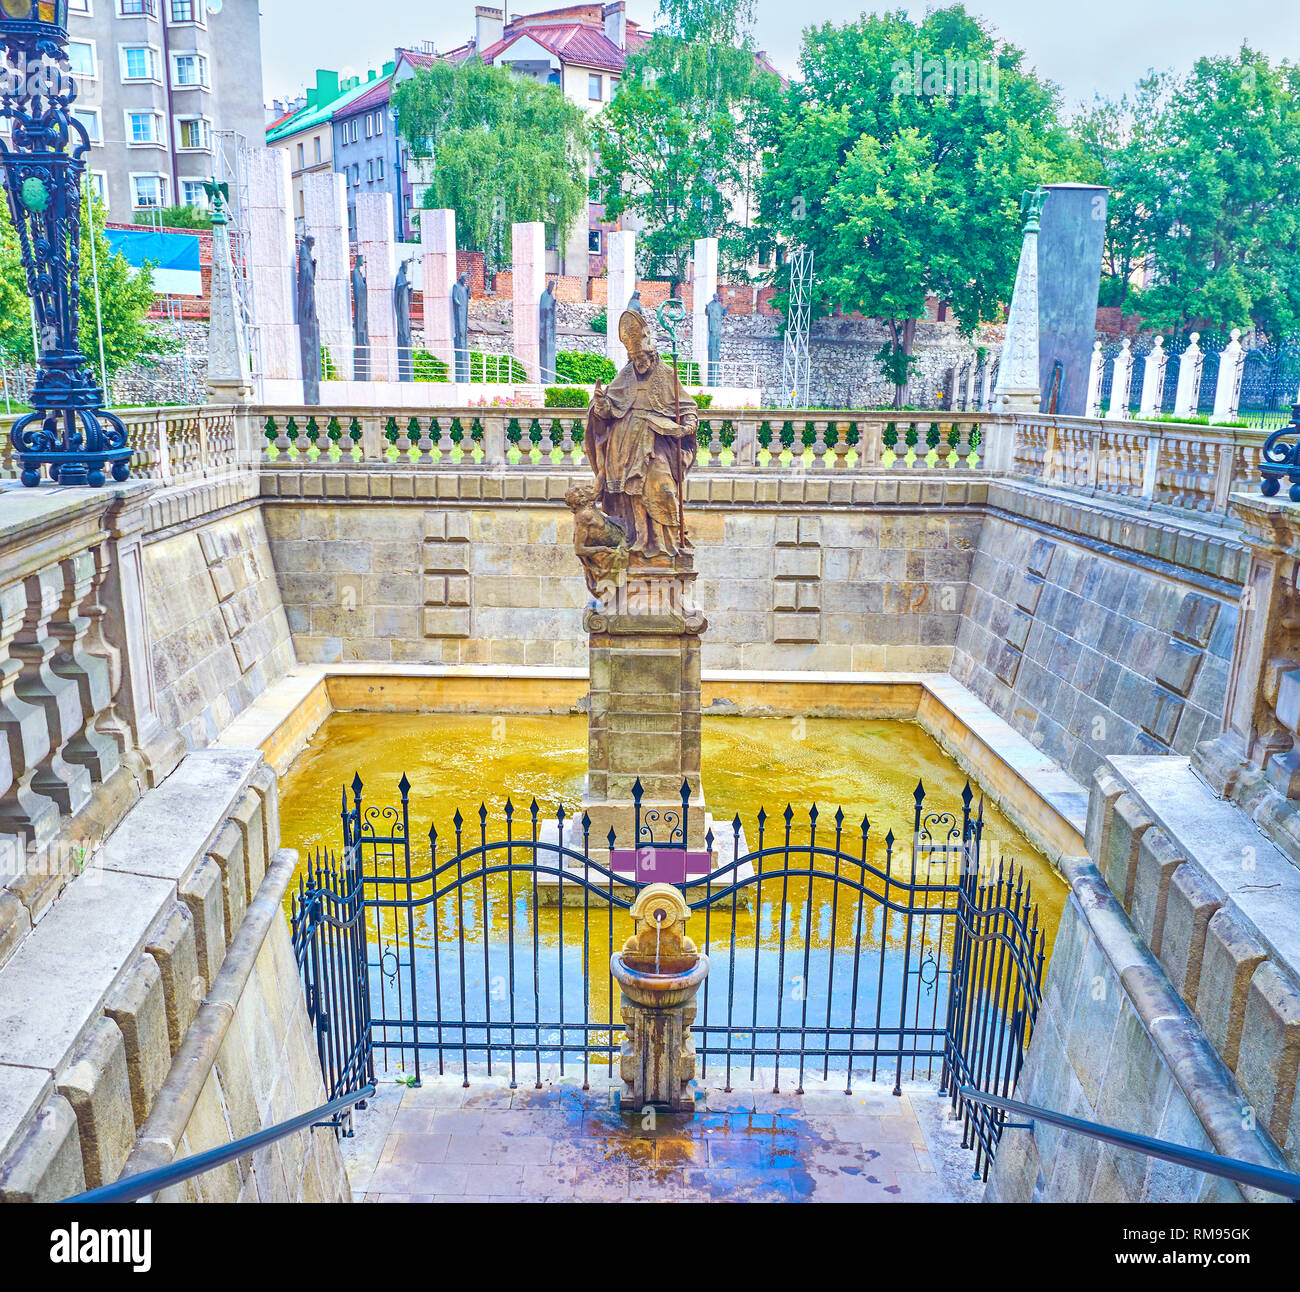 The Holy Water spring of the fountain of St Stanislaus located at the courtyard of St Michael and St Stanislaus Church in Krakow, Poland Stock Photo